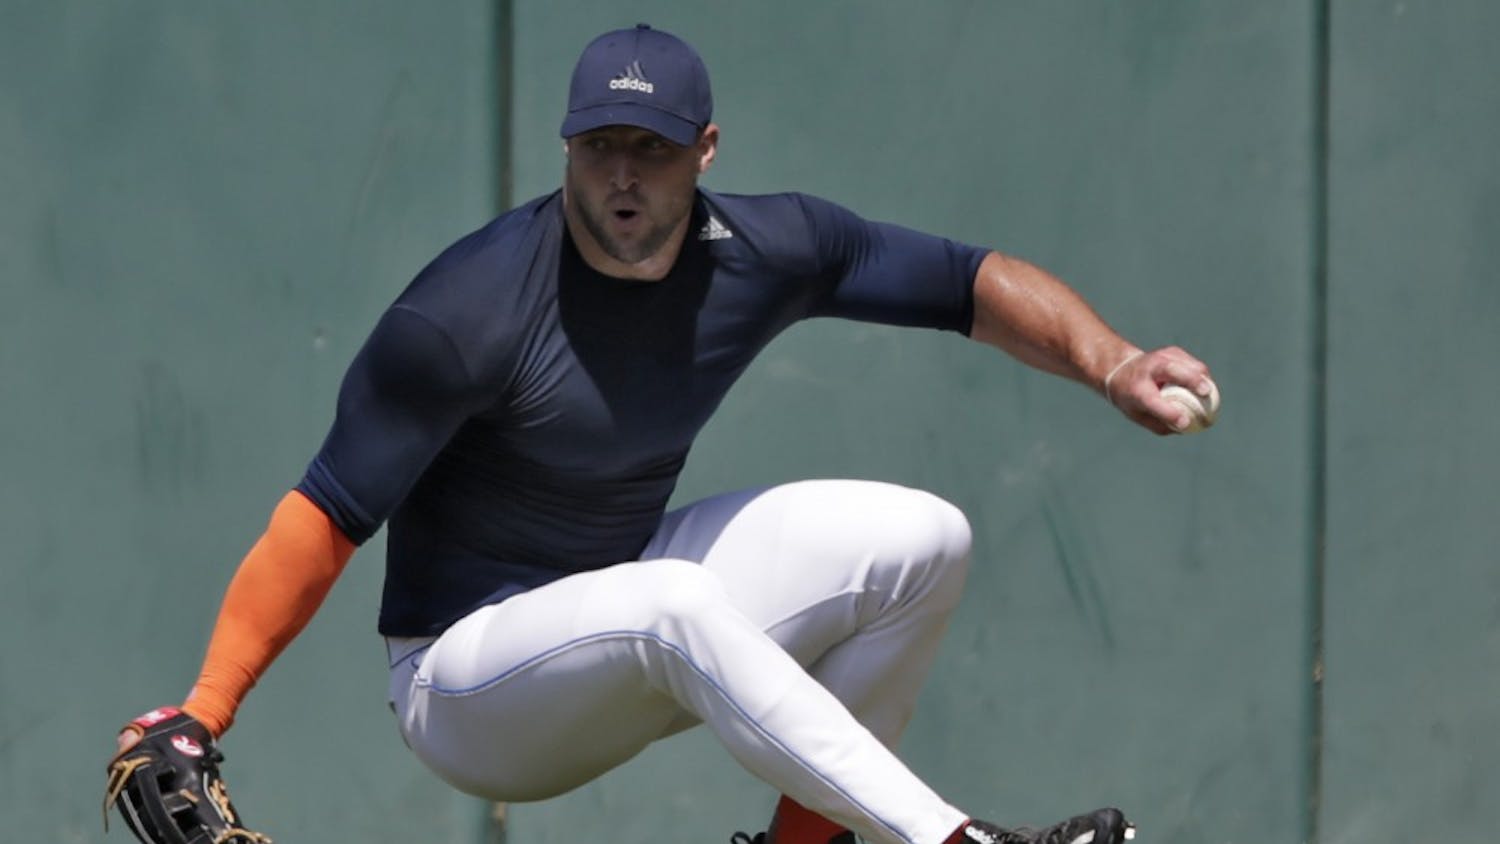 Former NFL quarterback Tim Tebow loses his footing as he fields a ball during outfield drills at USC's Dedeaux Field in Los Angeles during a private baseball tryout on Tuesday, Aug. 30, 2016. (Robert Gauthier/Los Angeles Times/TNS)